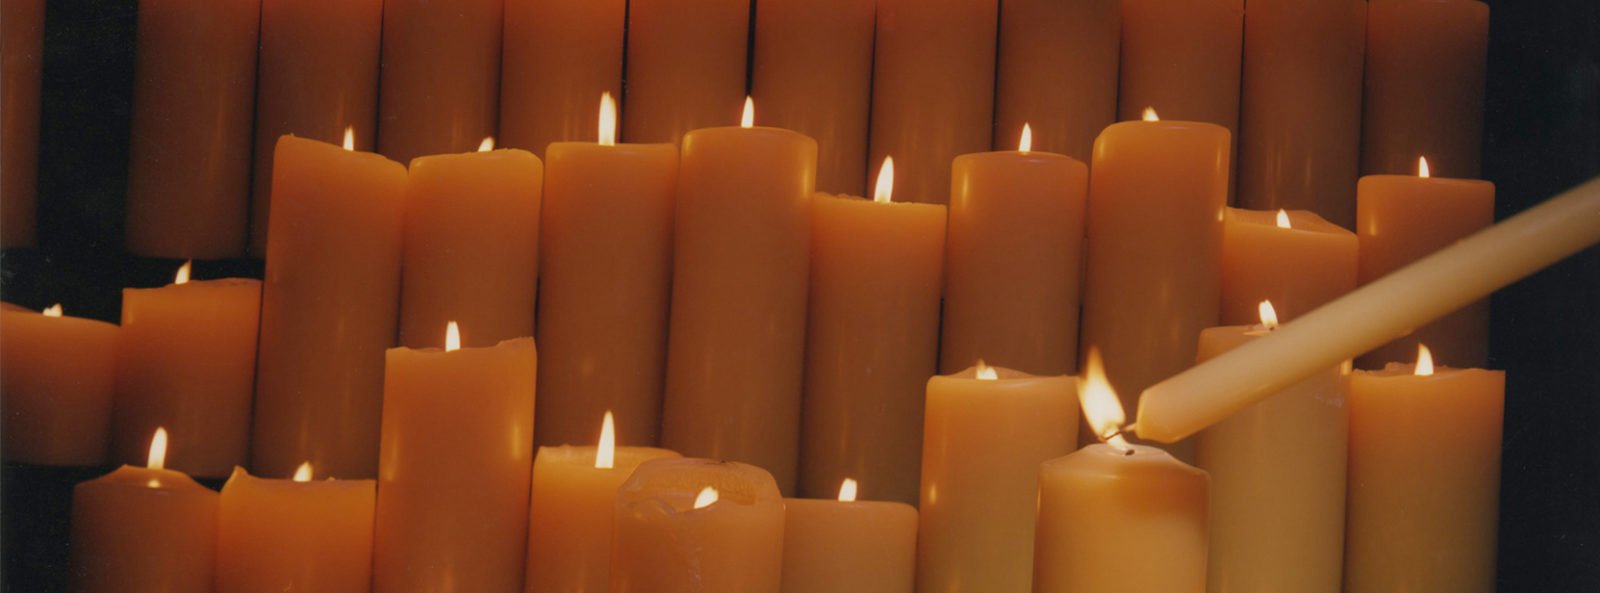 Candles being lit. copy; Sissie Honoré